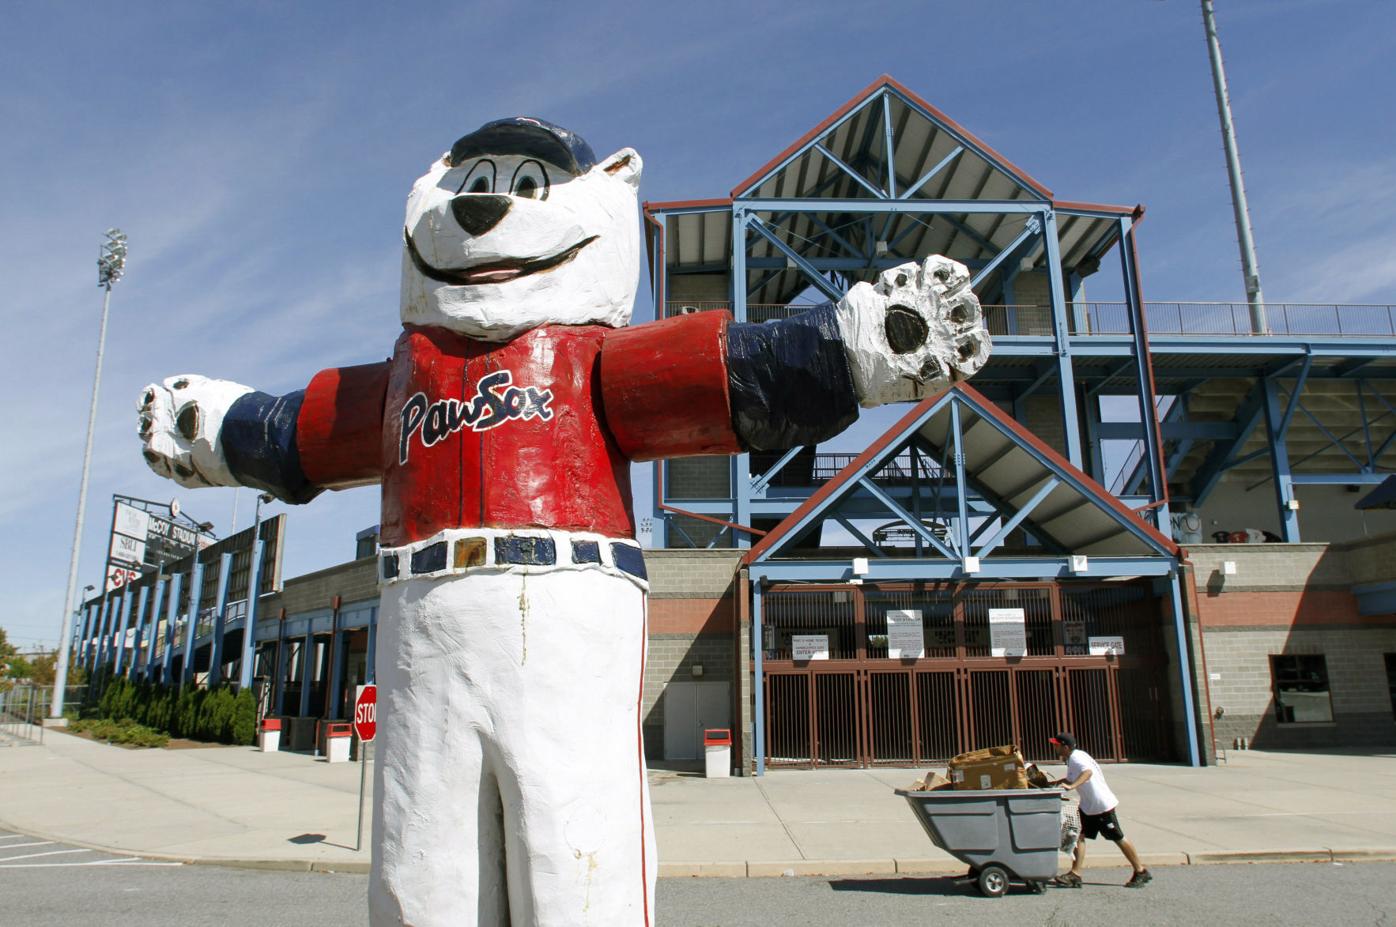 YOUNG: Give the WooSox a chance, Local Sports